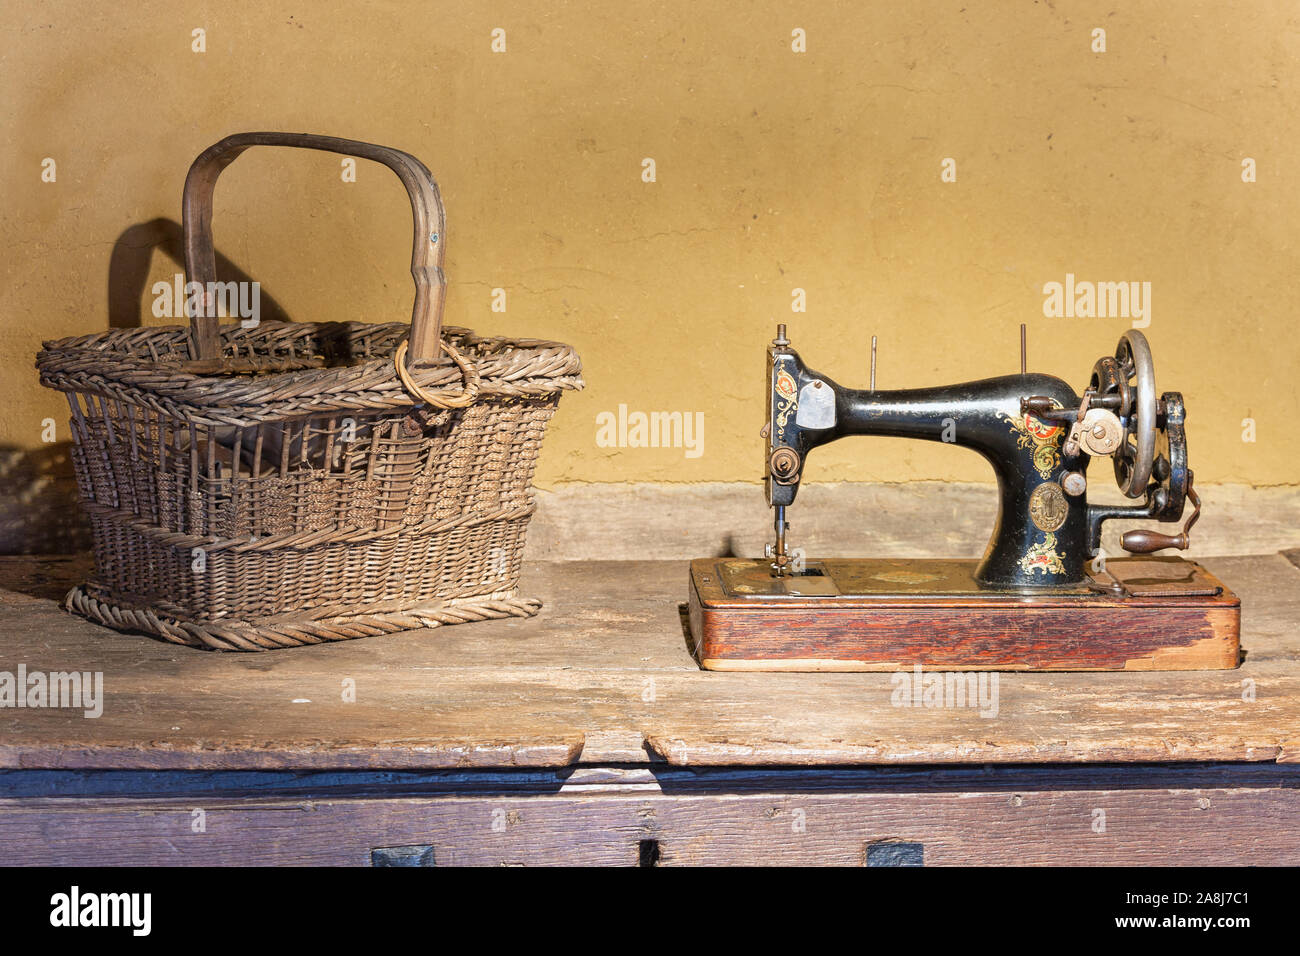 Dutch agricultural museum with reed basket and Singer sewing machine Stock Photo